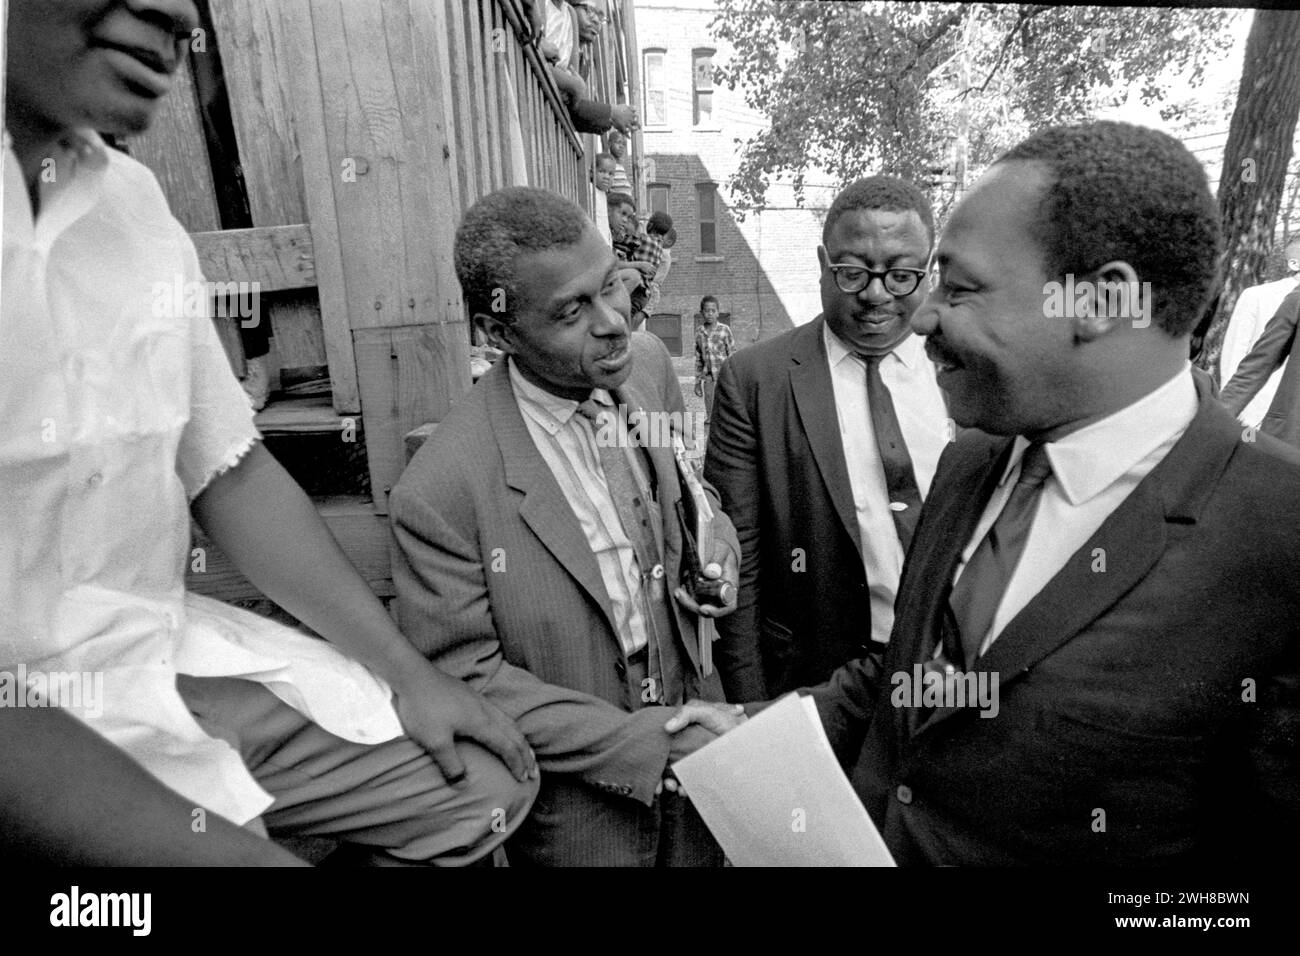 Dr Martin Luthur King Jr and Gathering of Civil Rights Leaders During a Momentous Meeting in the 1960s Stock Photo